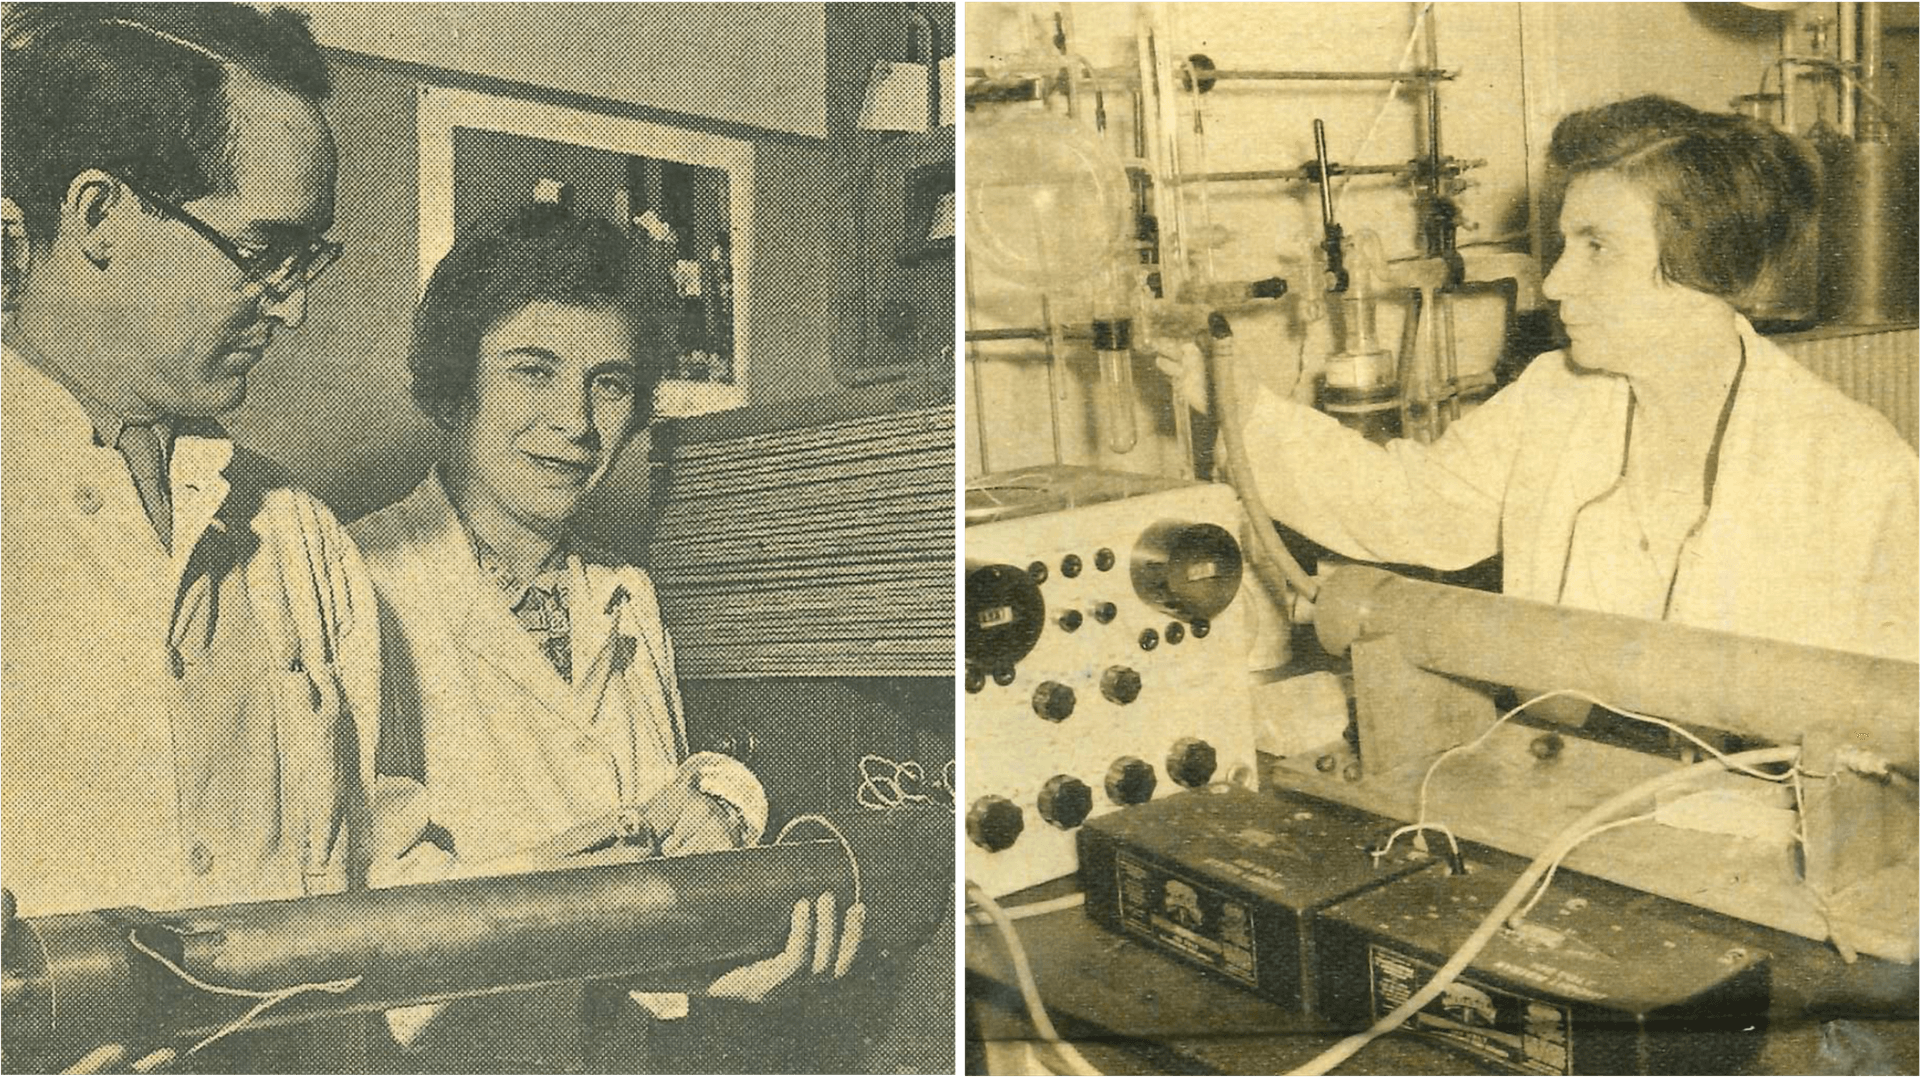 Two old newspaper clippings. At left, Hilde Levi and another physicist stand at radiocarbon dating equipment; at right, Hilde Levi sits alone at a laboratory machine.